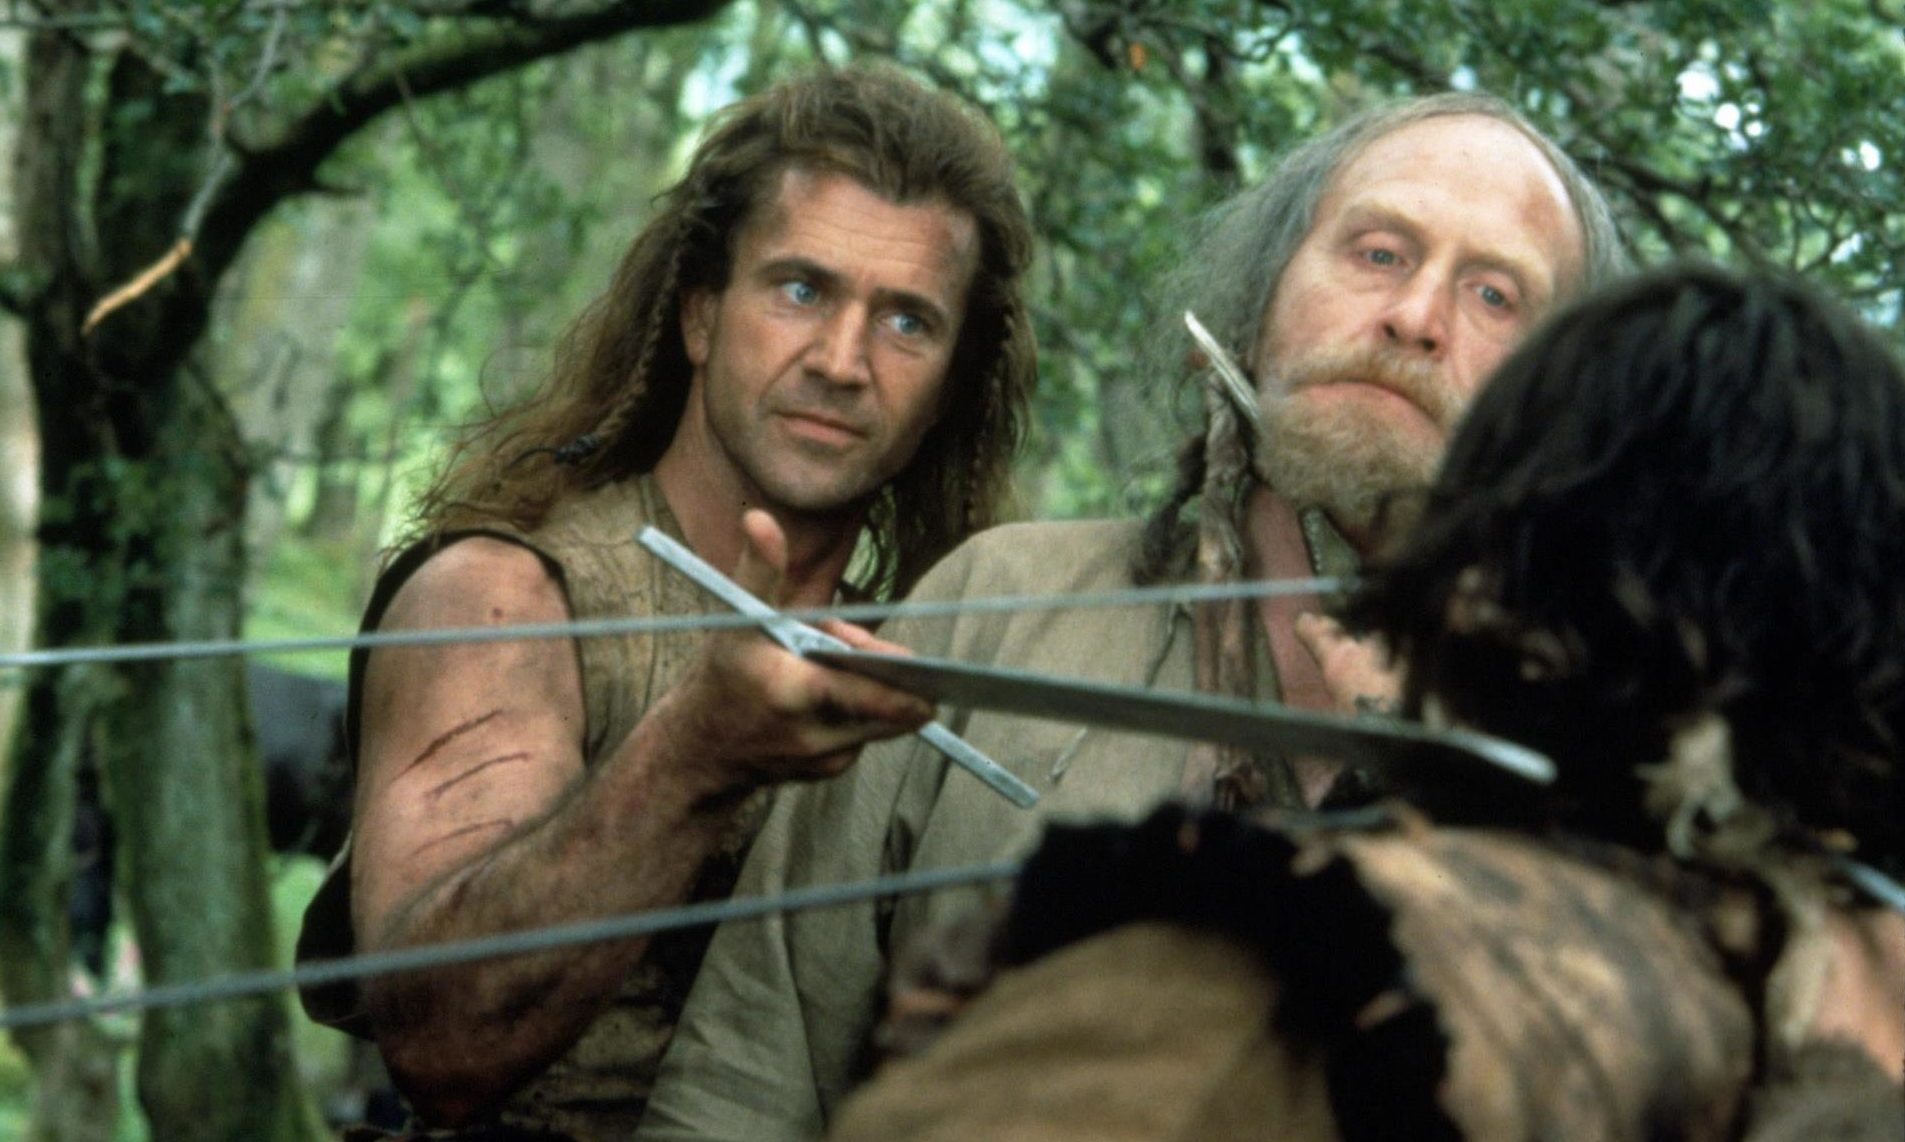 Scots actor James Cosmo loved filming Braveheart with Mel Gibson.